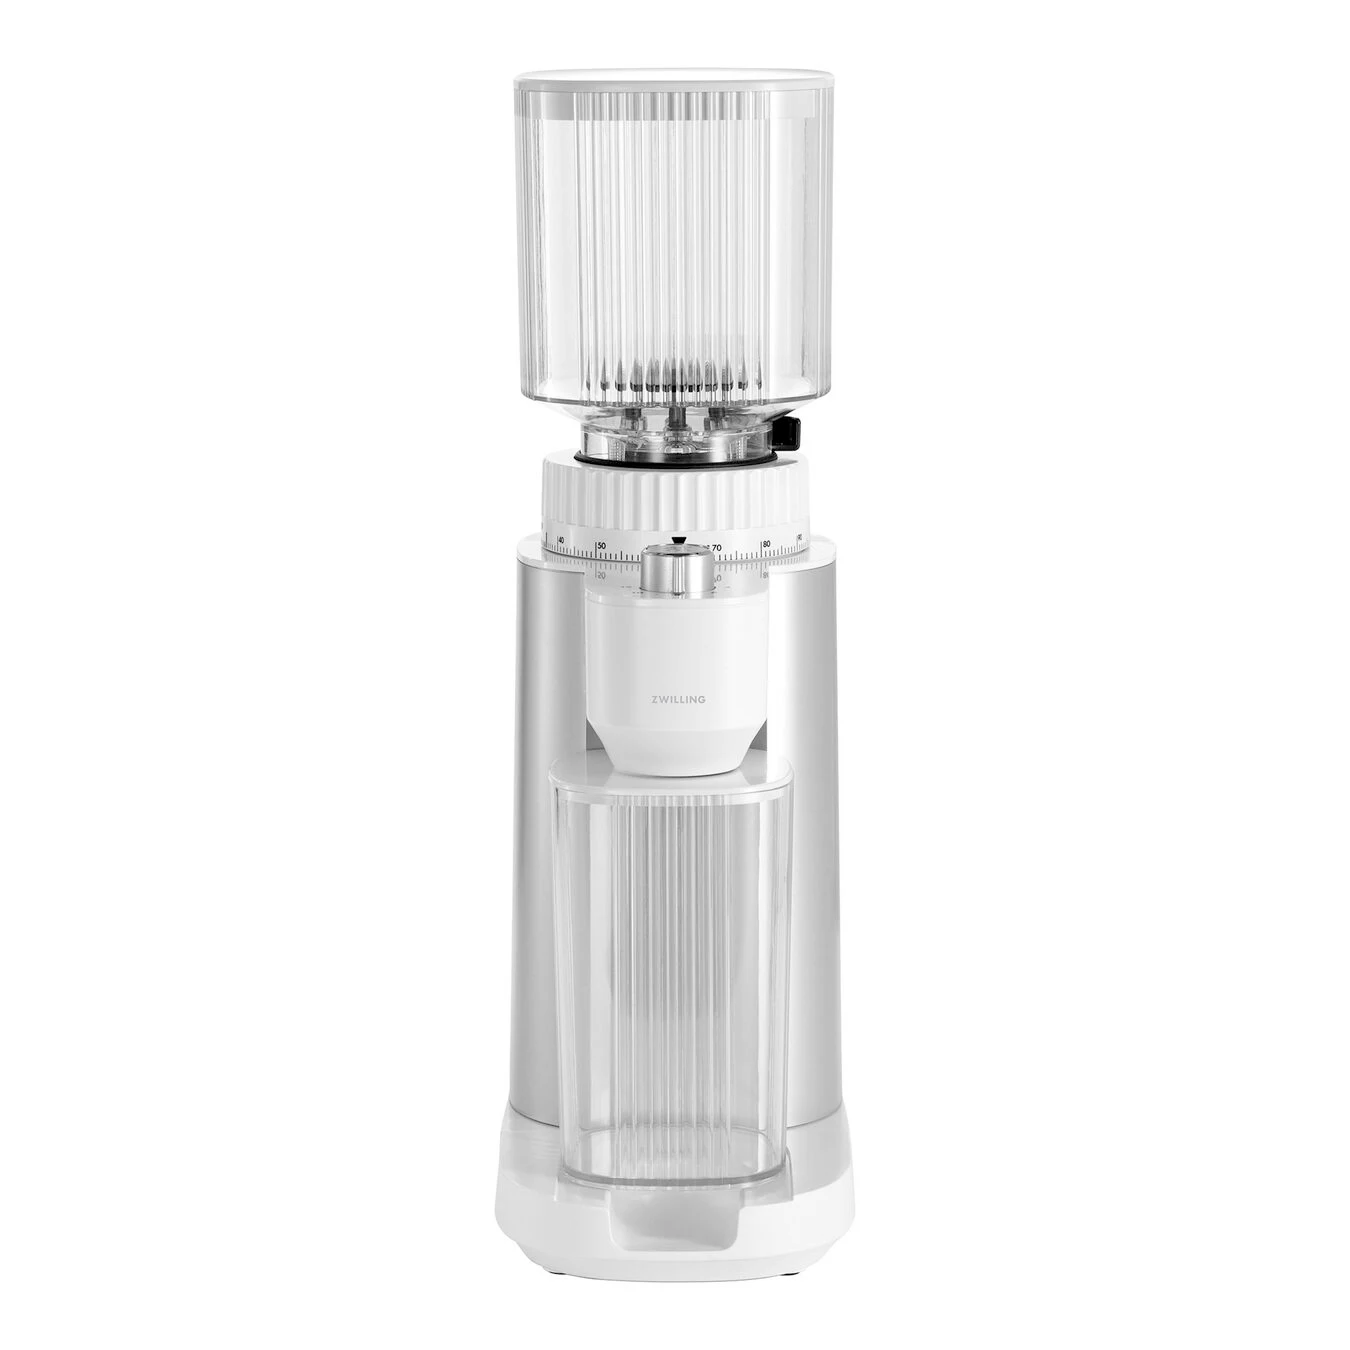 ZWILLING Enfinigy Coffee Grinder, Silver-1